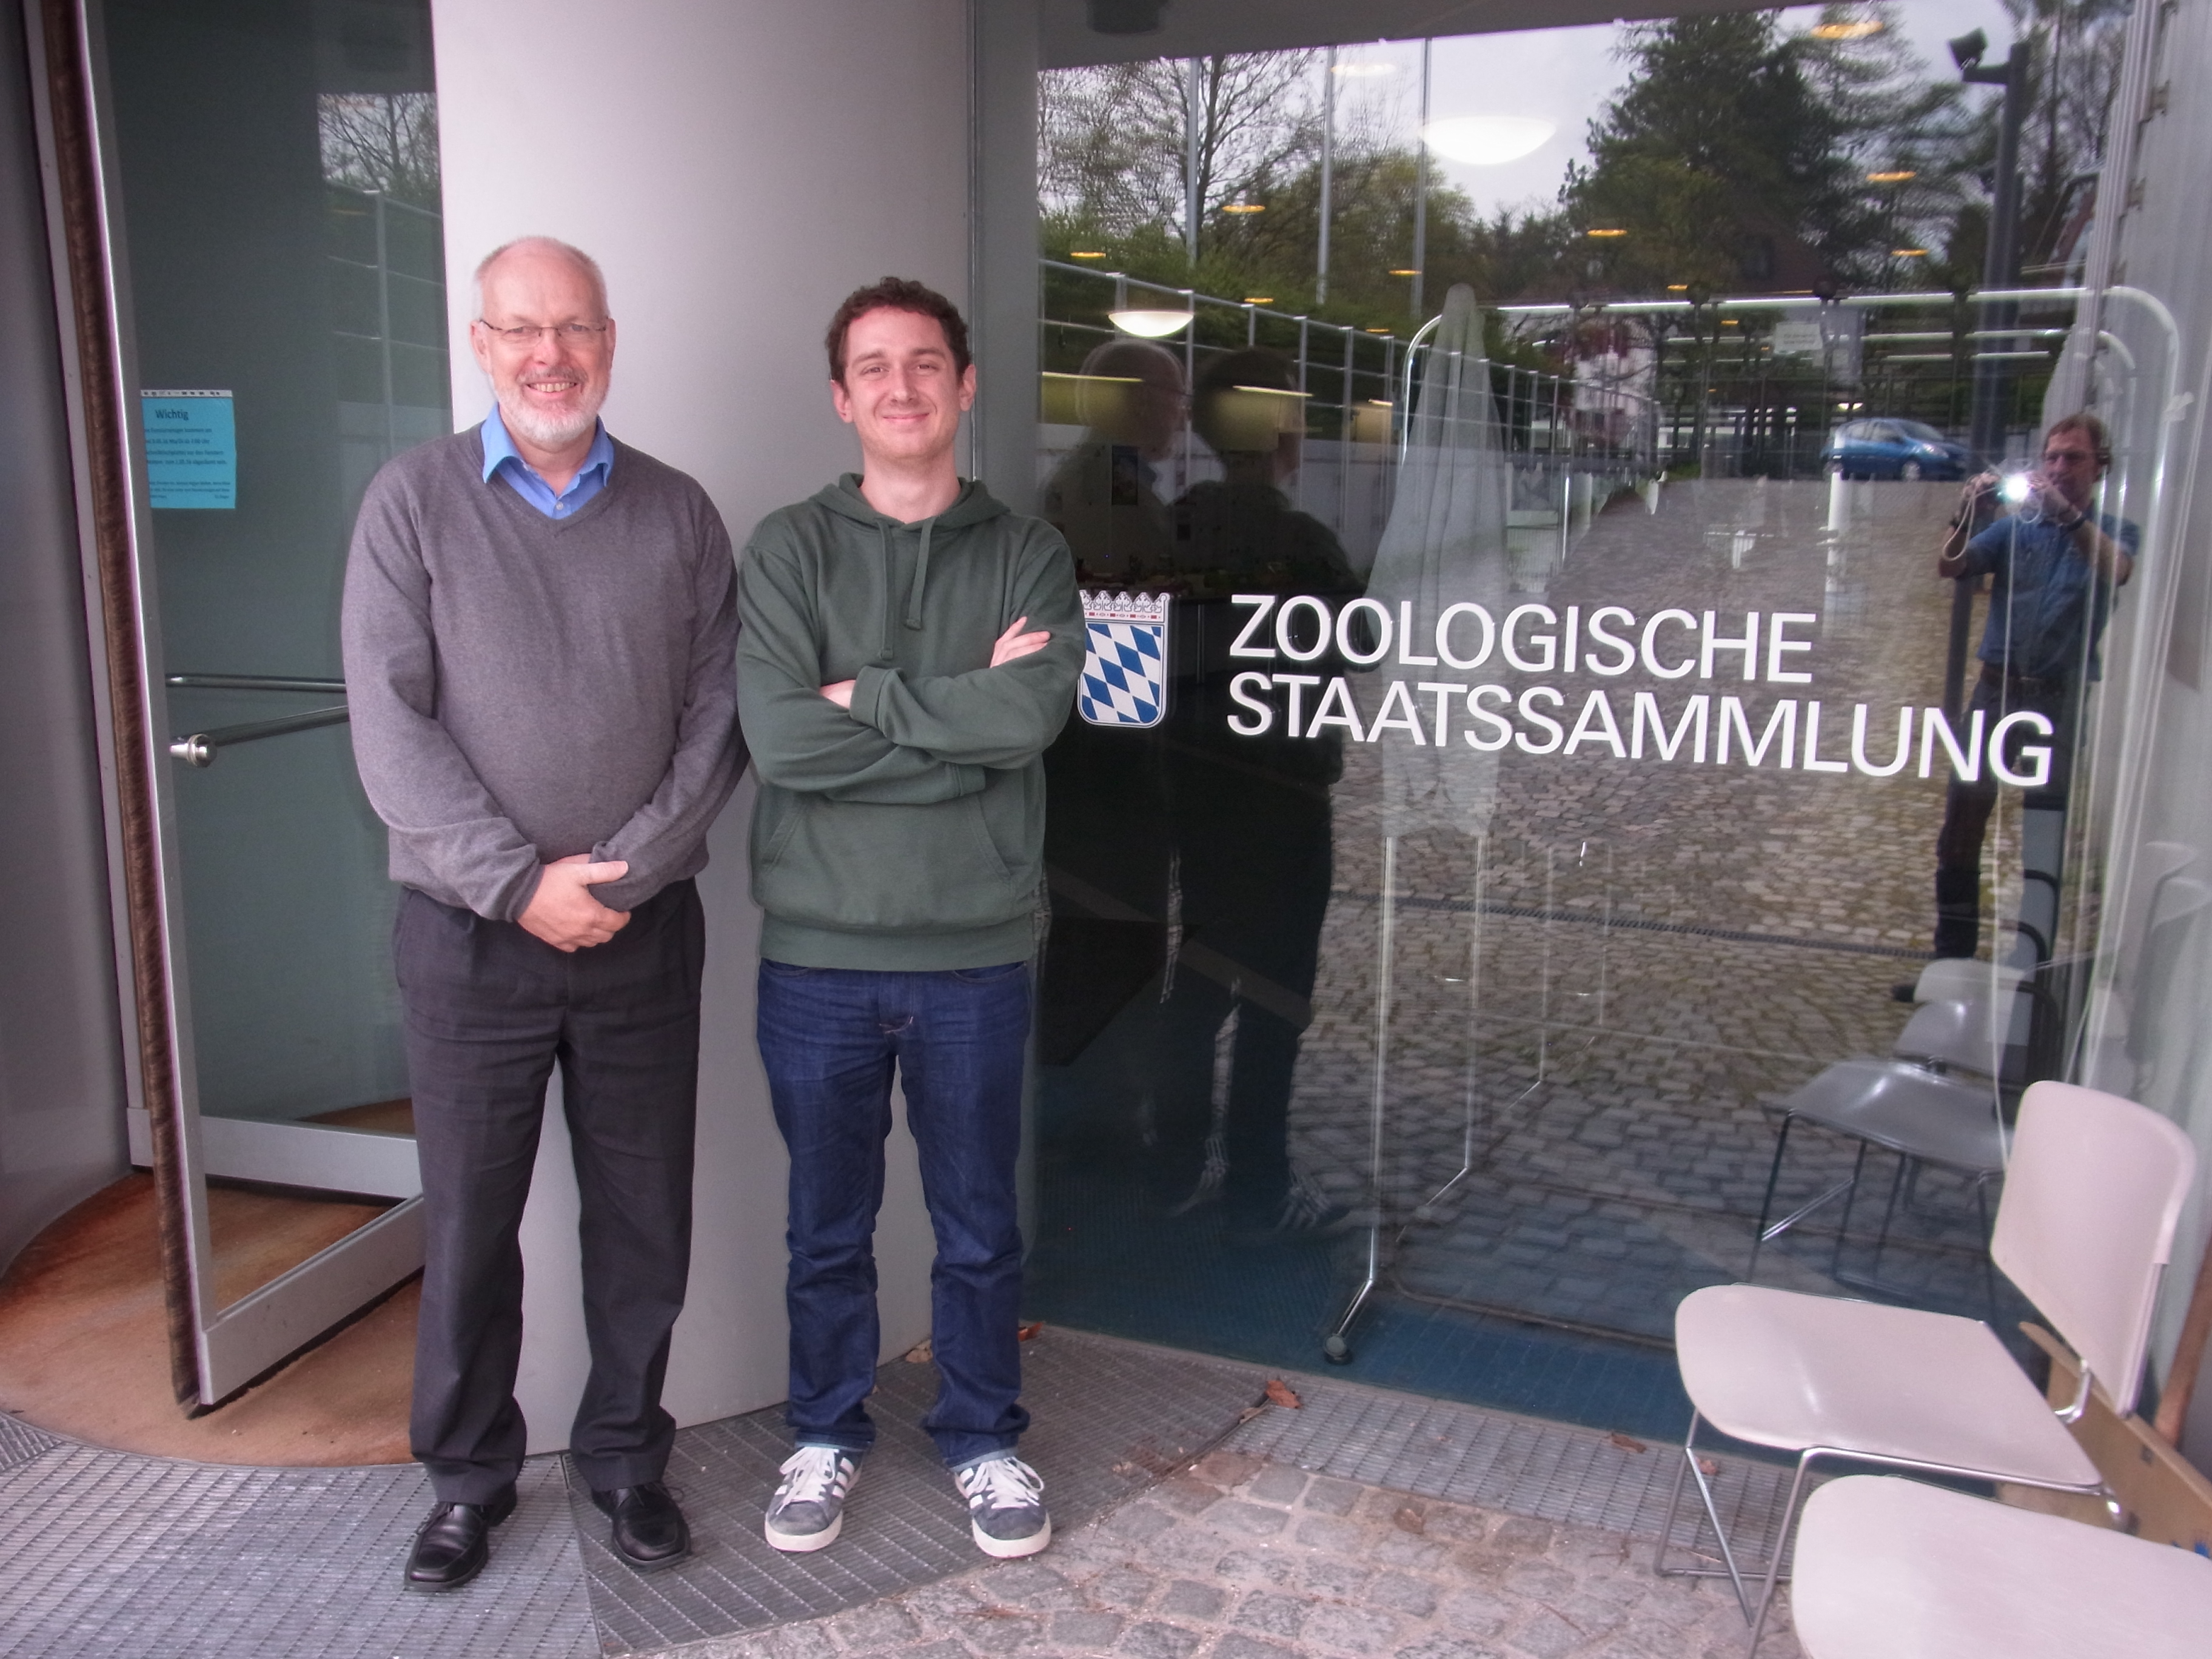 Dr. Axel Hausmann and Vincent Maicher in front of the Munich's collection.